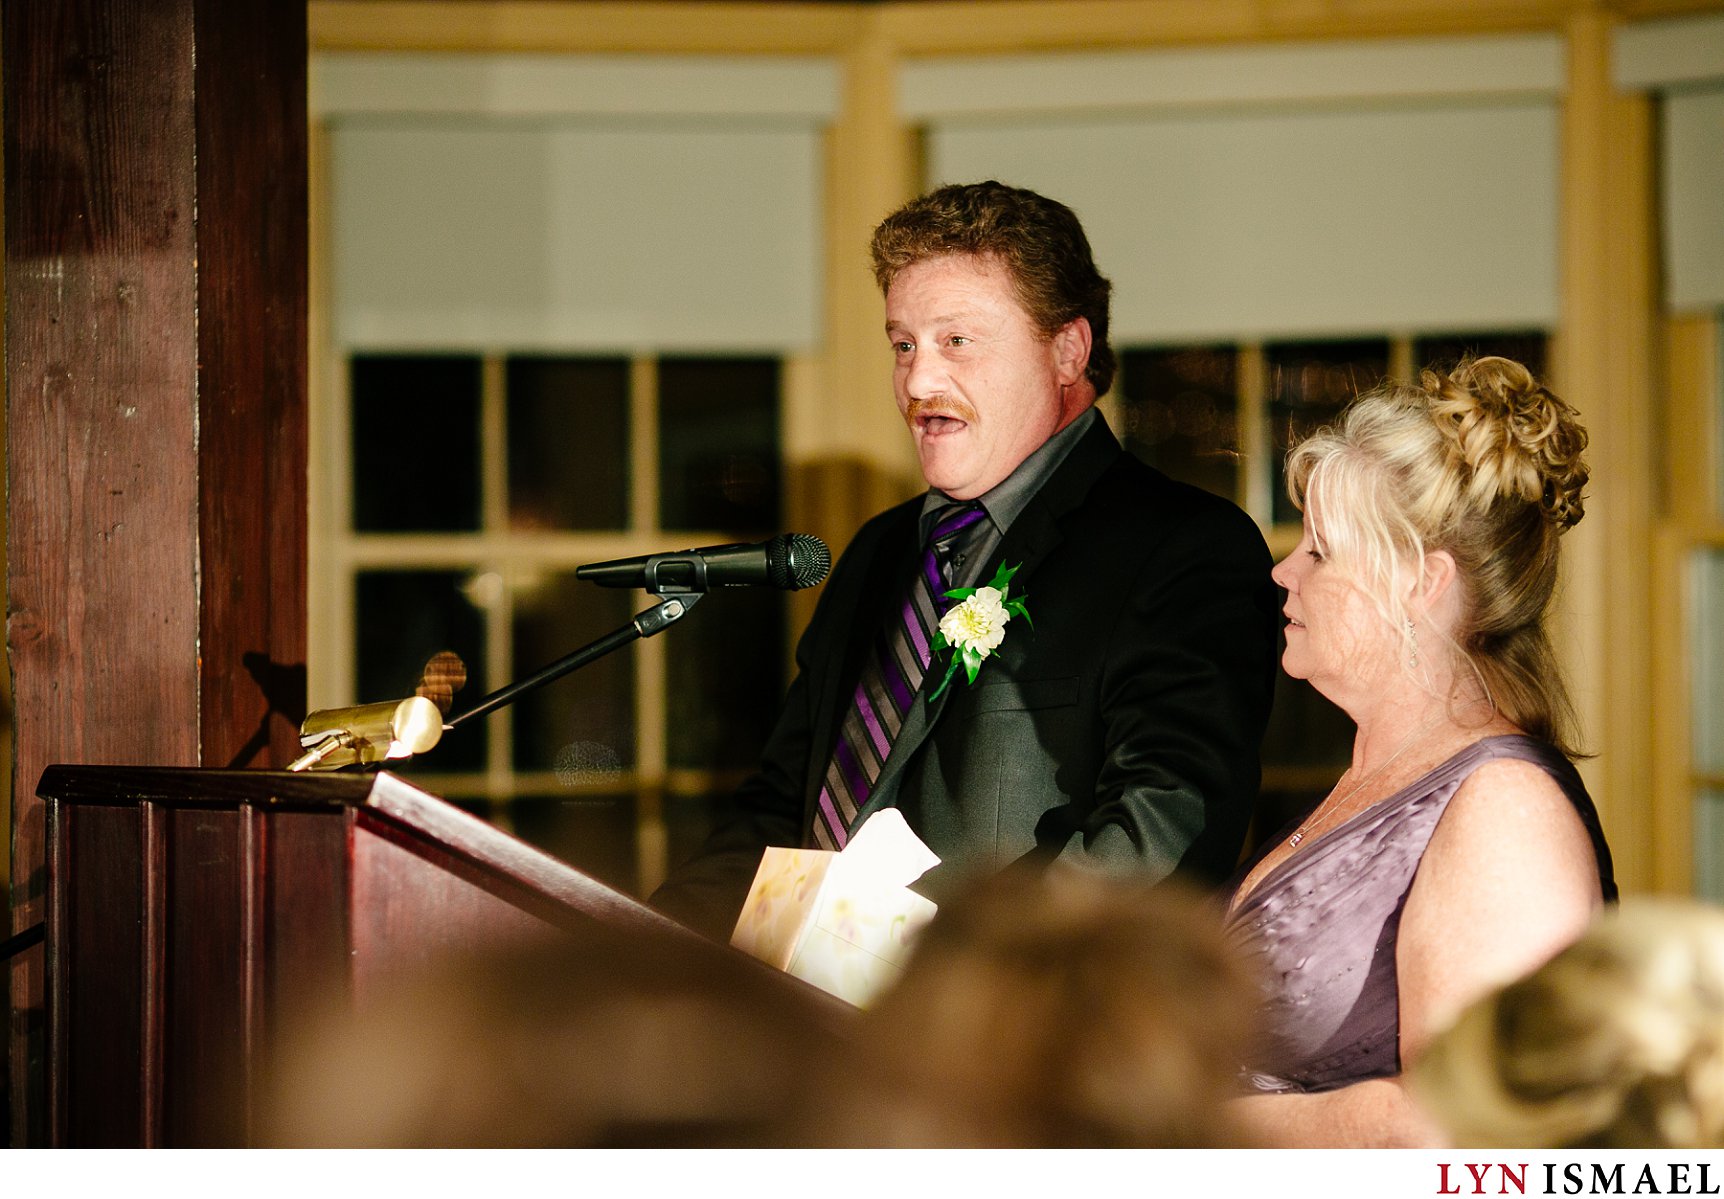 The father of the bride delivers a speech.